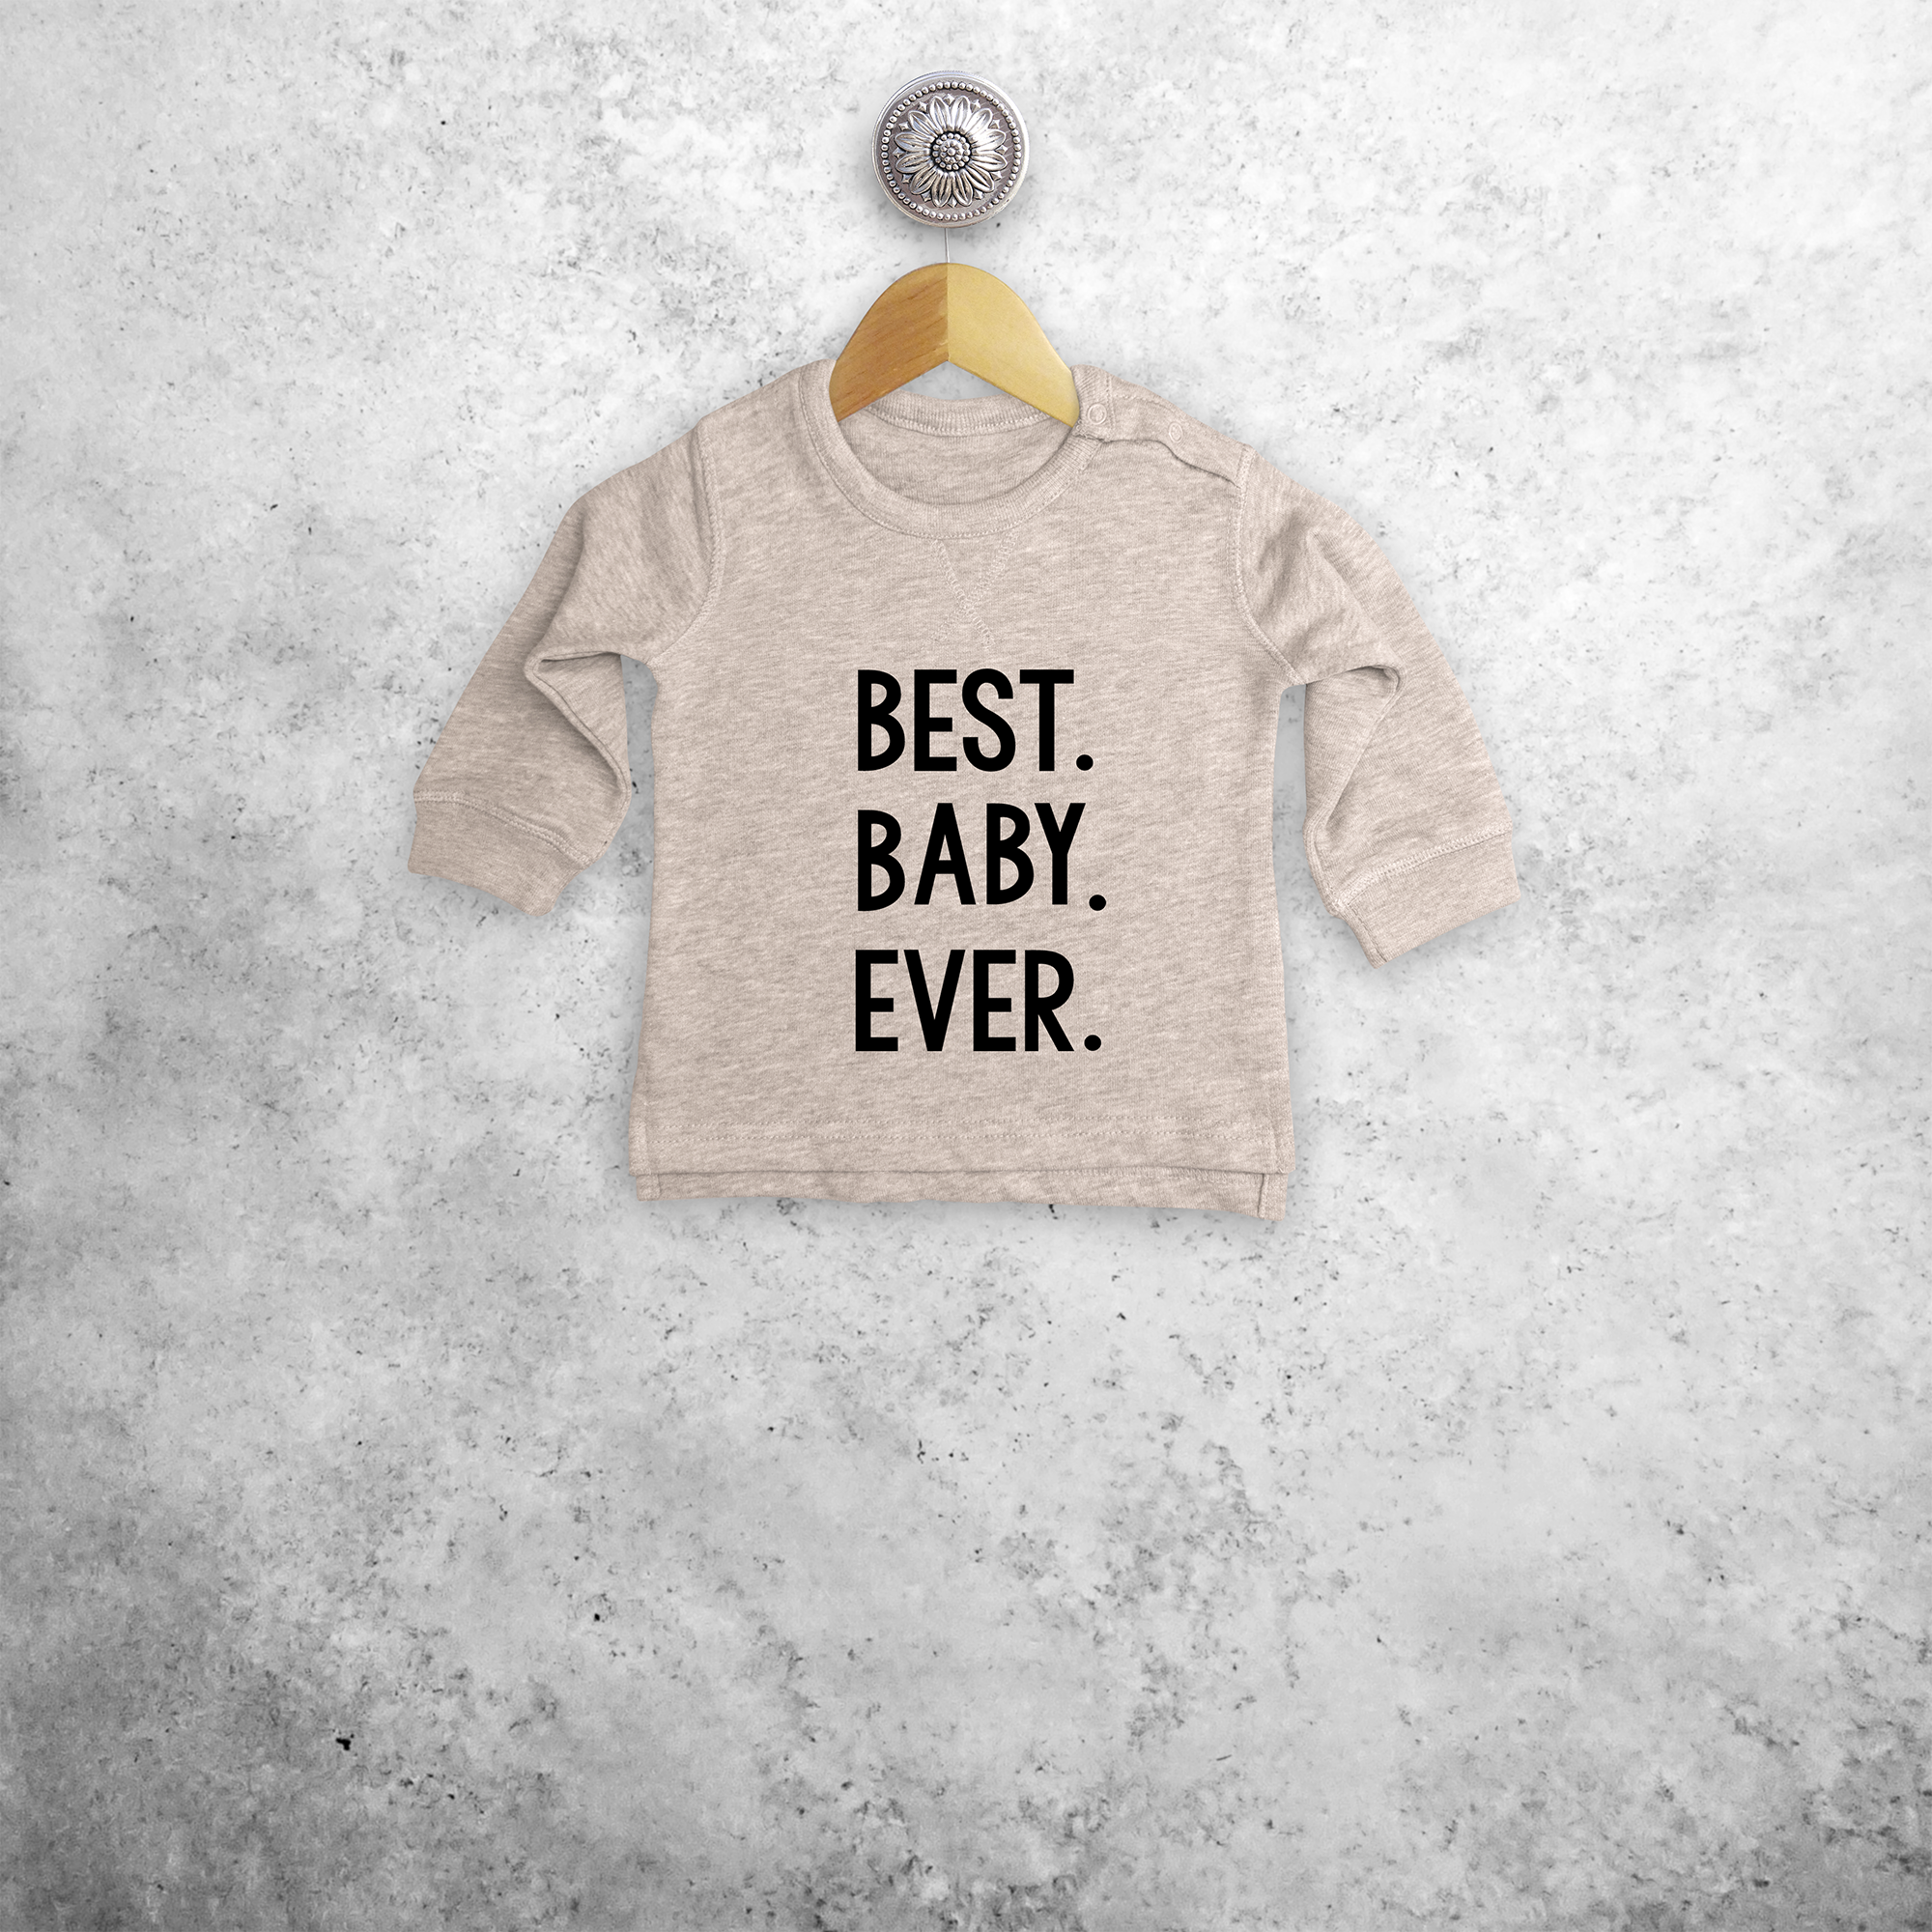 'Best. Baby. Ever.' baby sweater